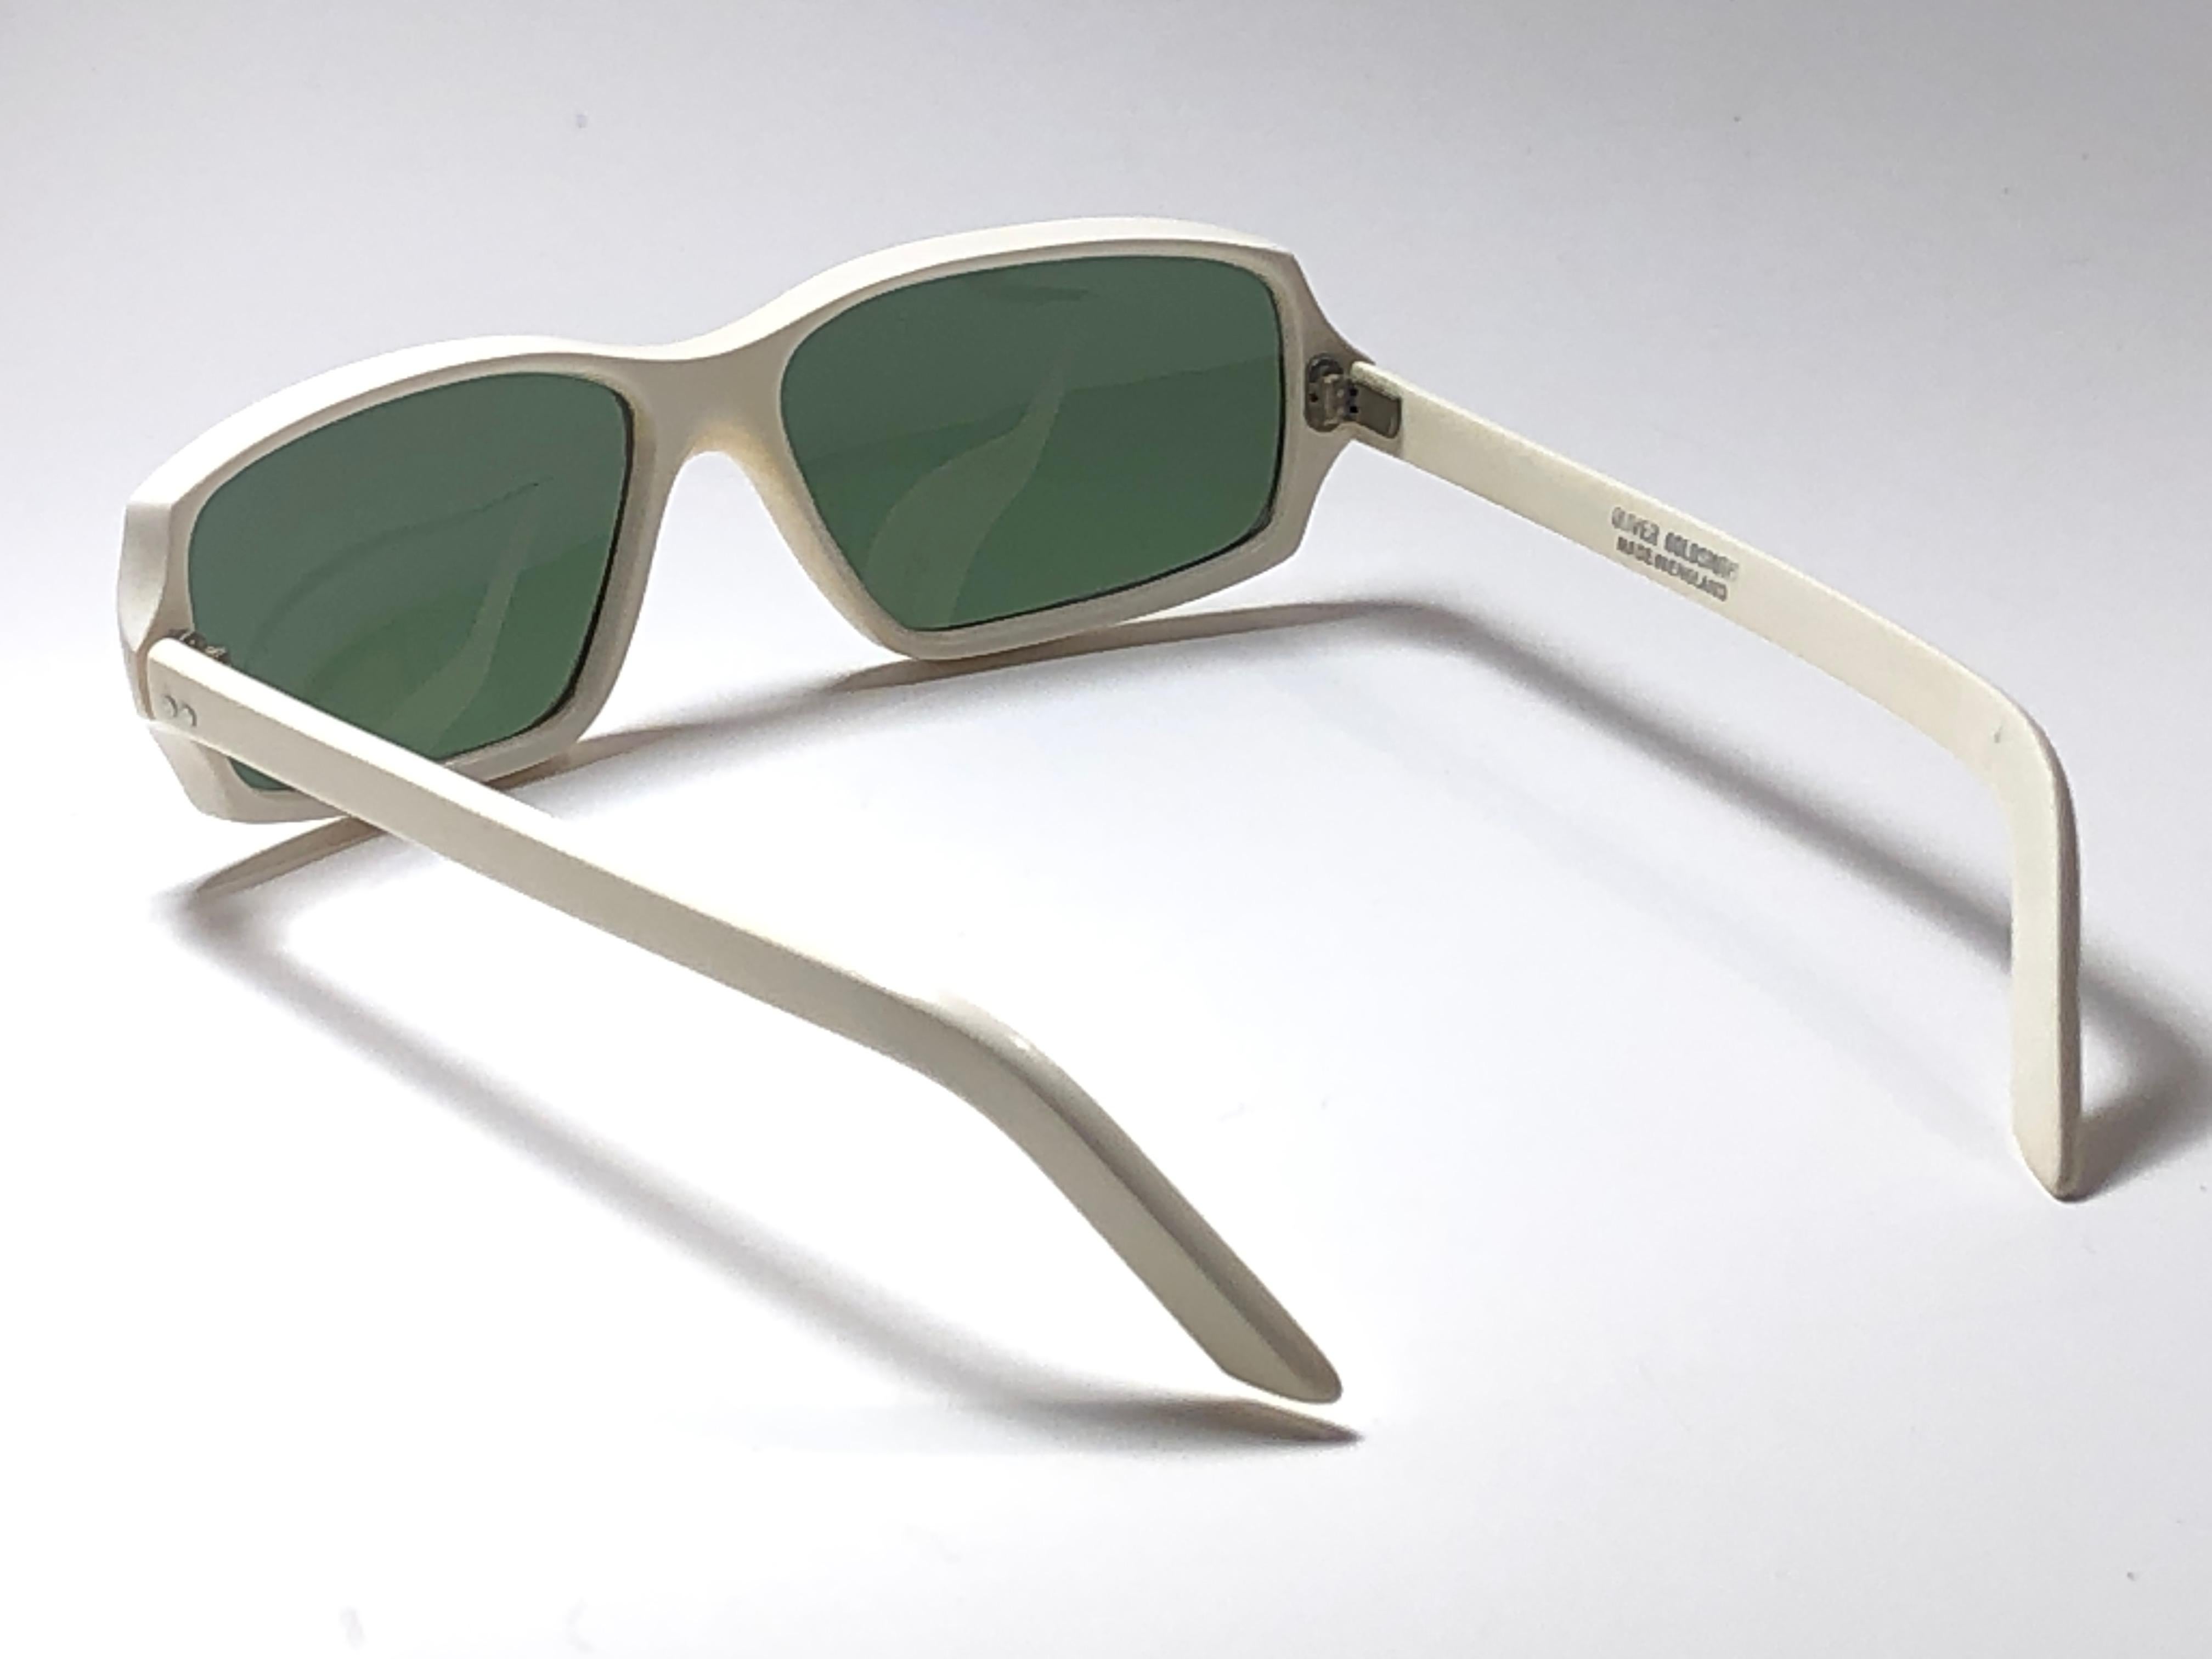 Vintage Oliver Goldsmith Small White Frame 1970 Made in England Sunglasses In Excellent Condition For Sale In Baleares, Baleares